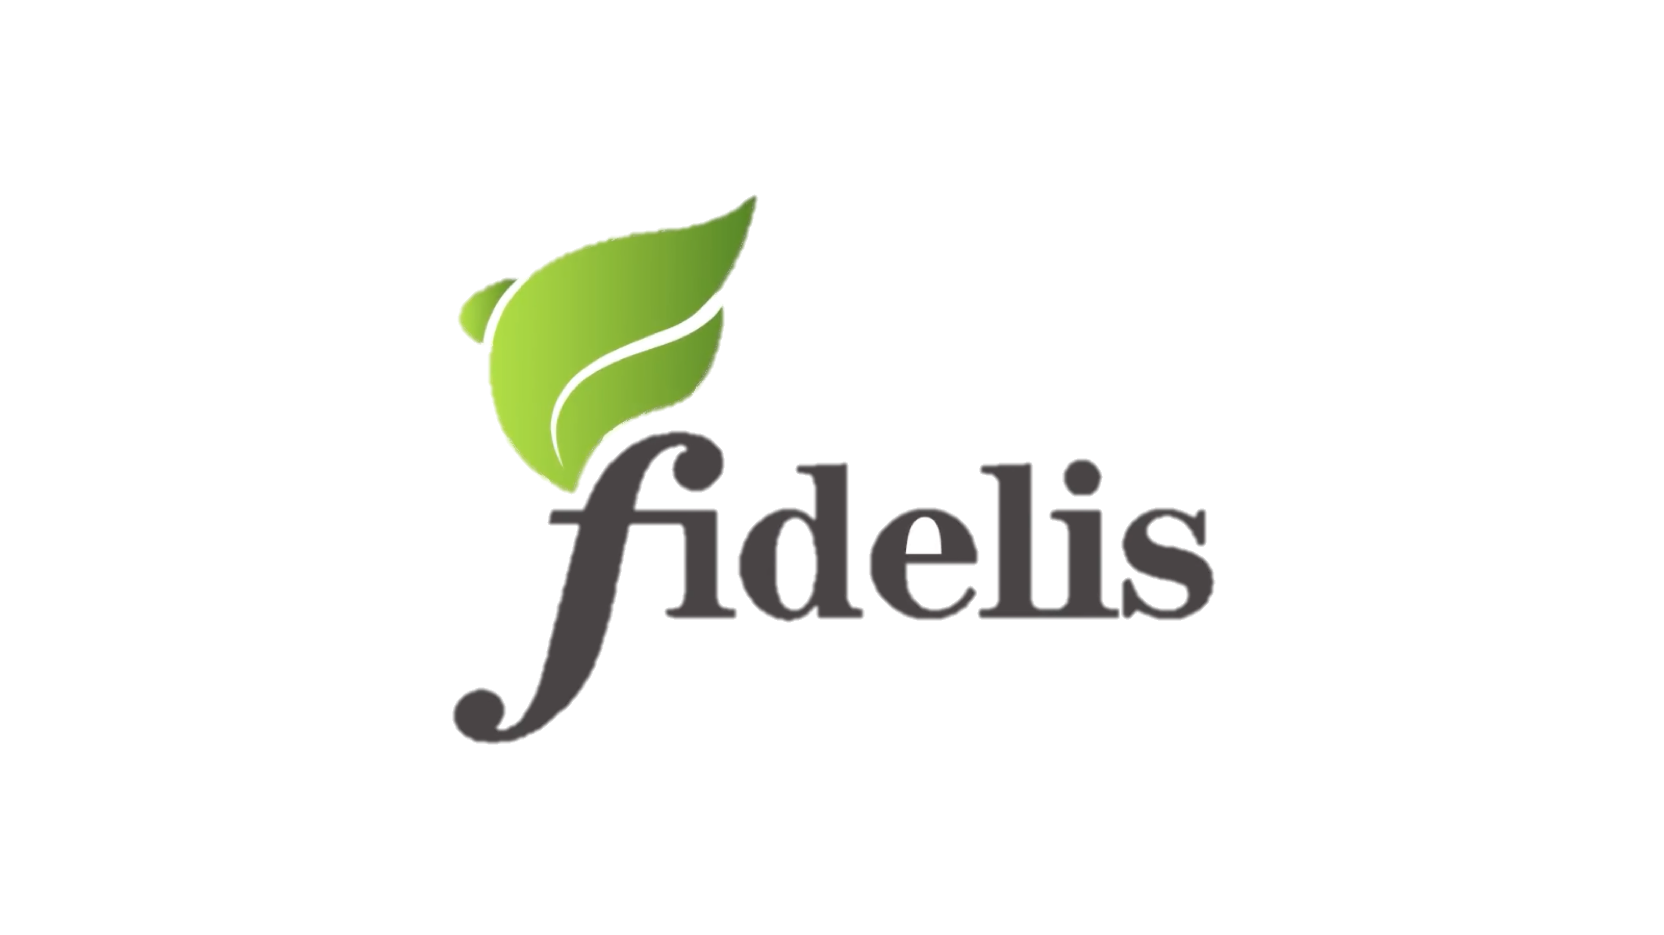 Fidelis no background.png